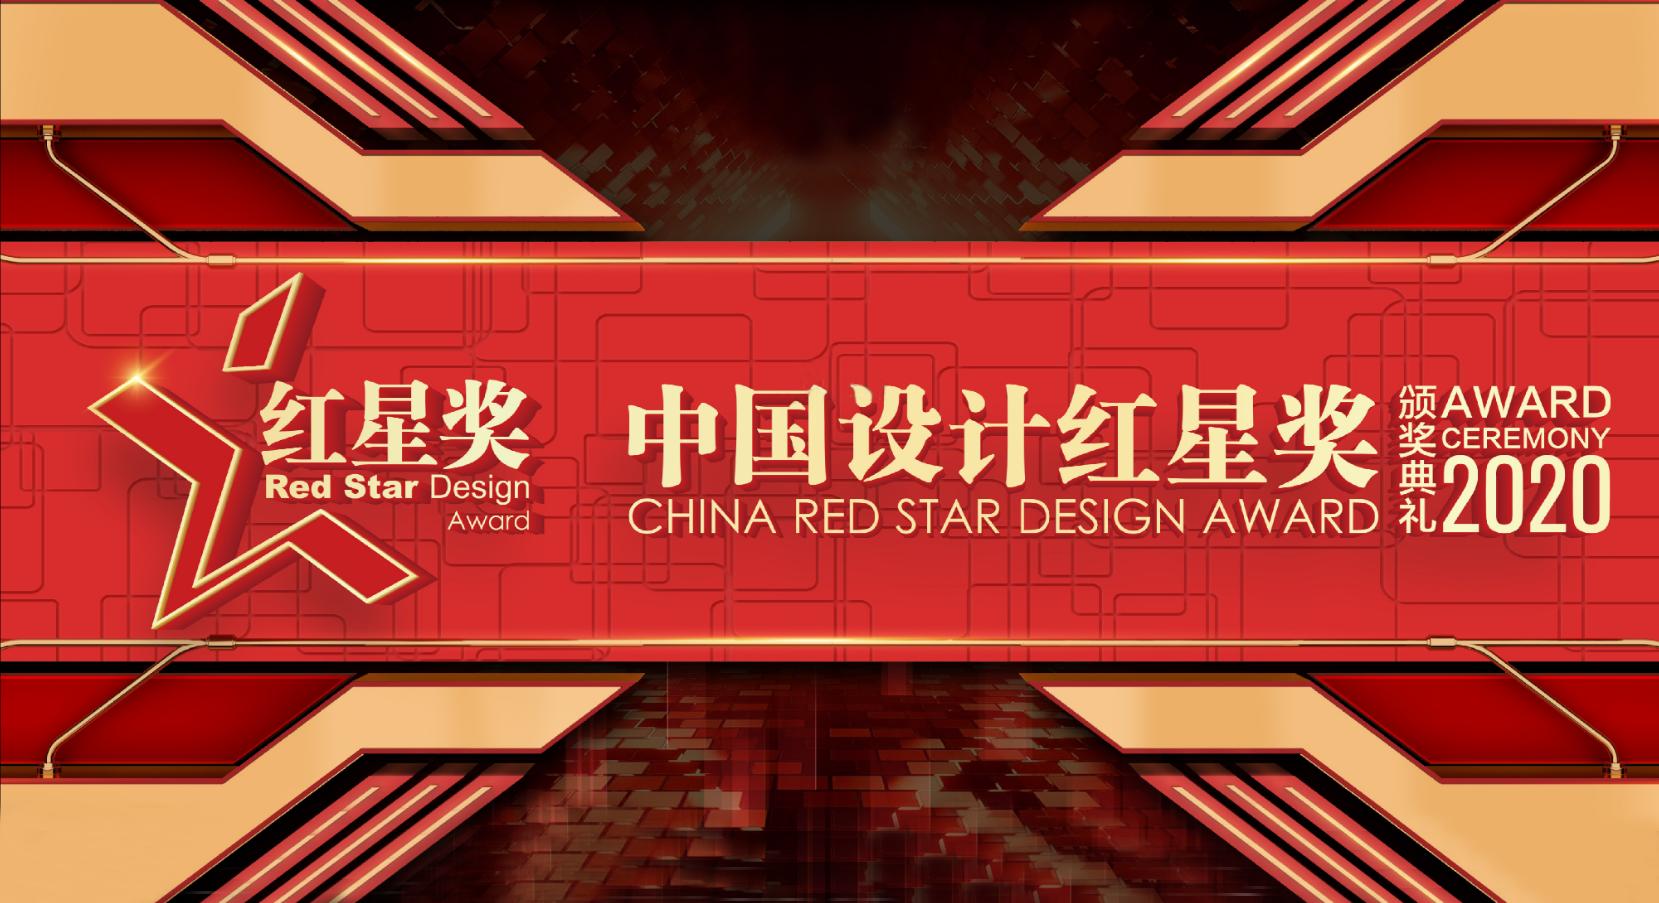 Meling Smart Vaccination Solution won the CHIAN RED STAR DESIGN AWARD